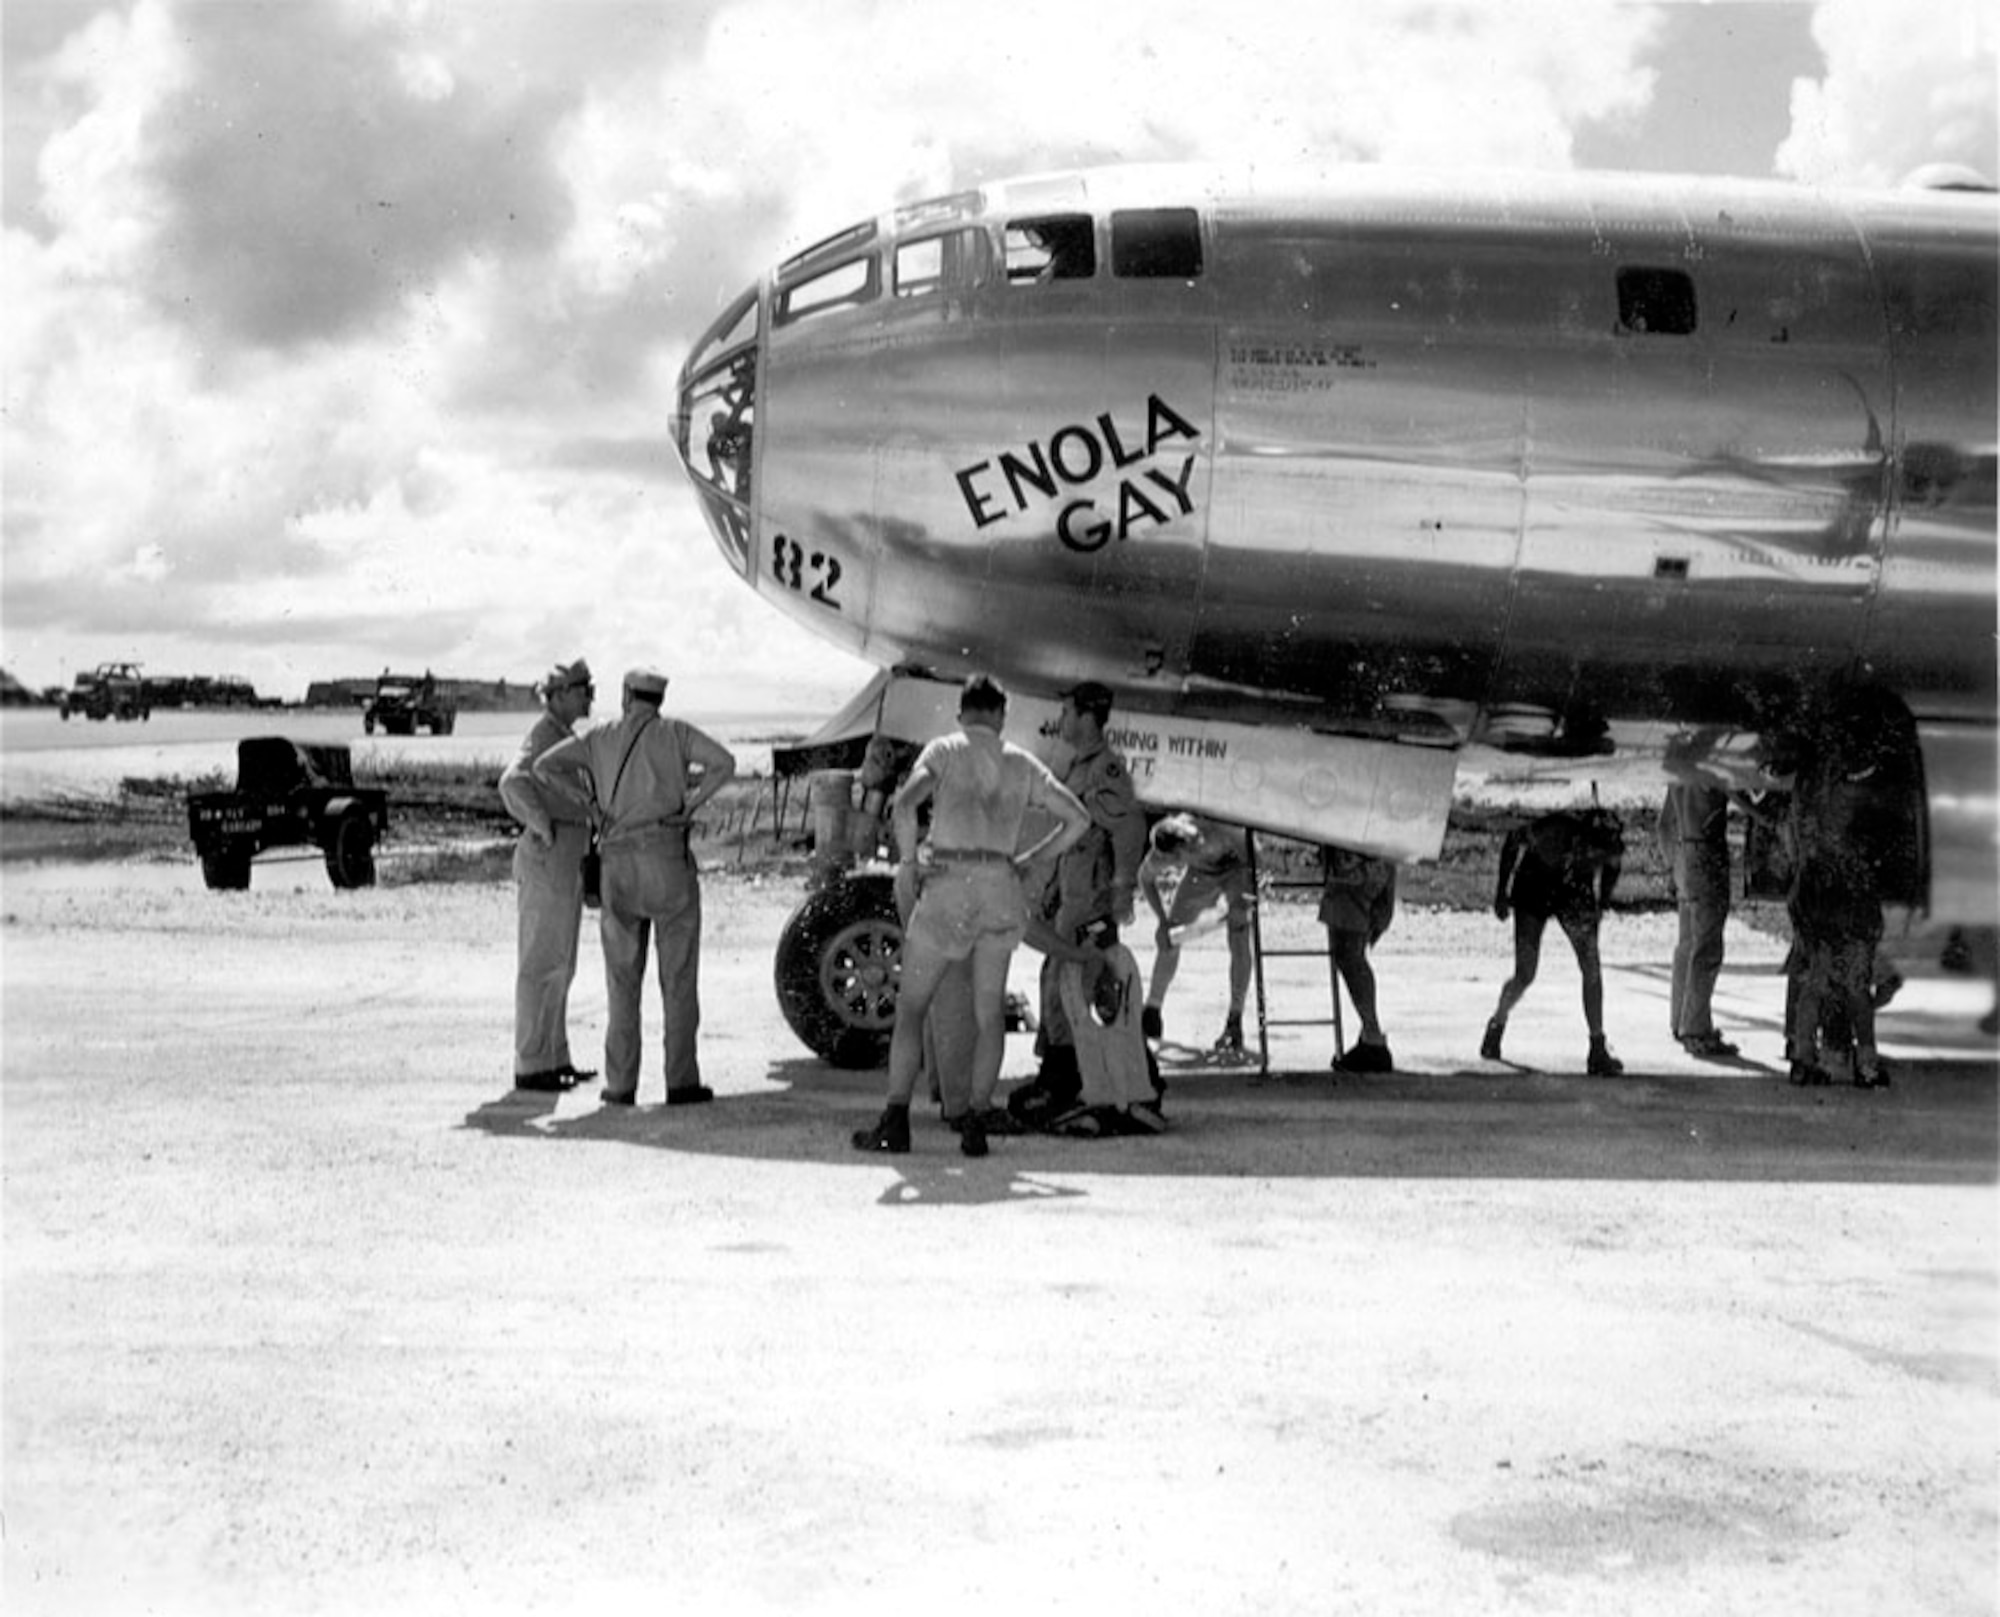 The B-29 ‘Enola Gay,’ gets prepared for a mission, 1945 at the Island of Tinian. (Courtesy photo)